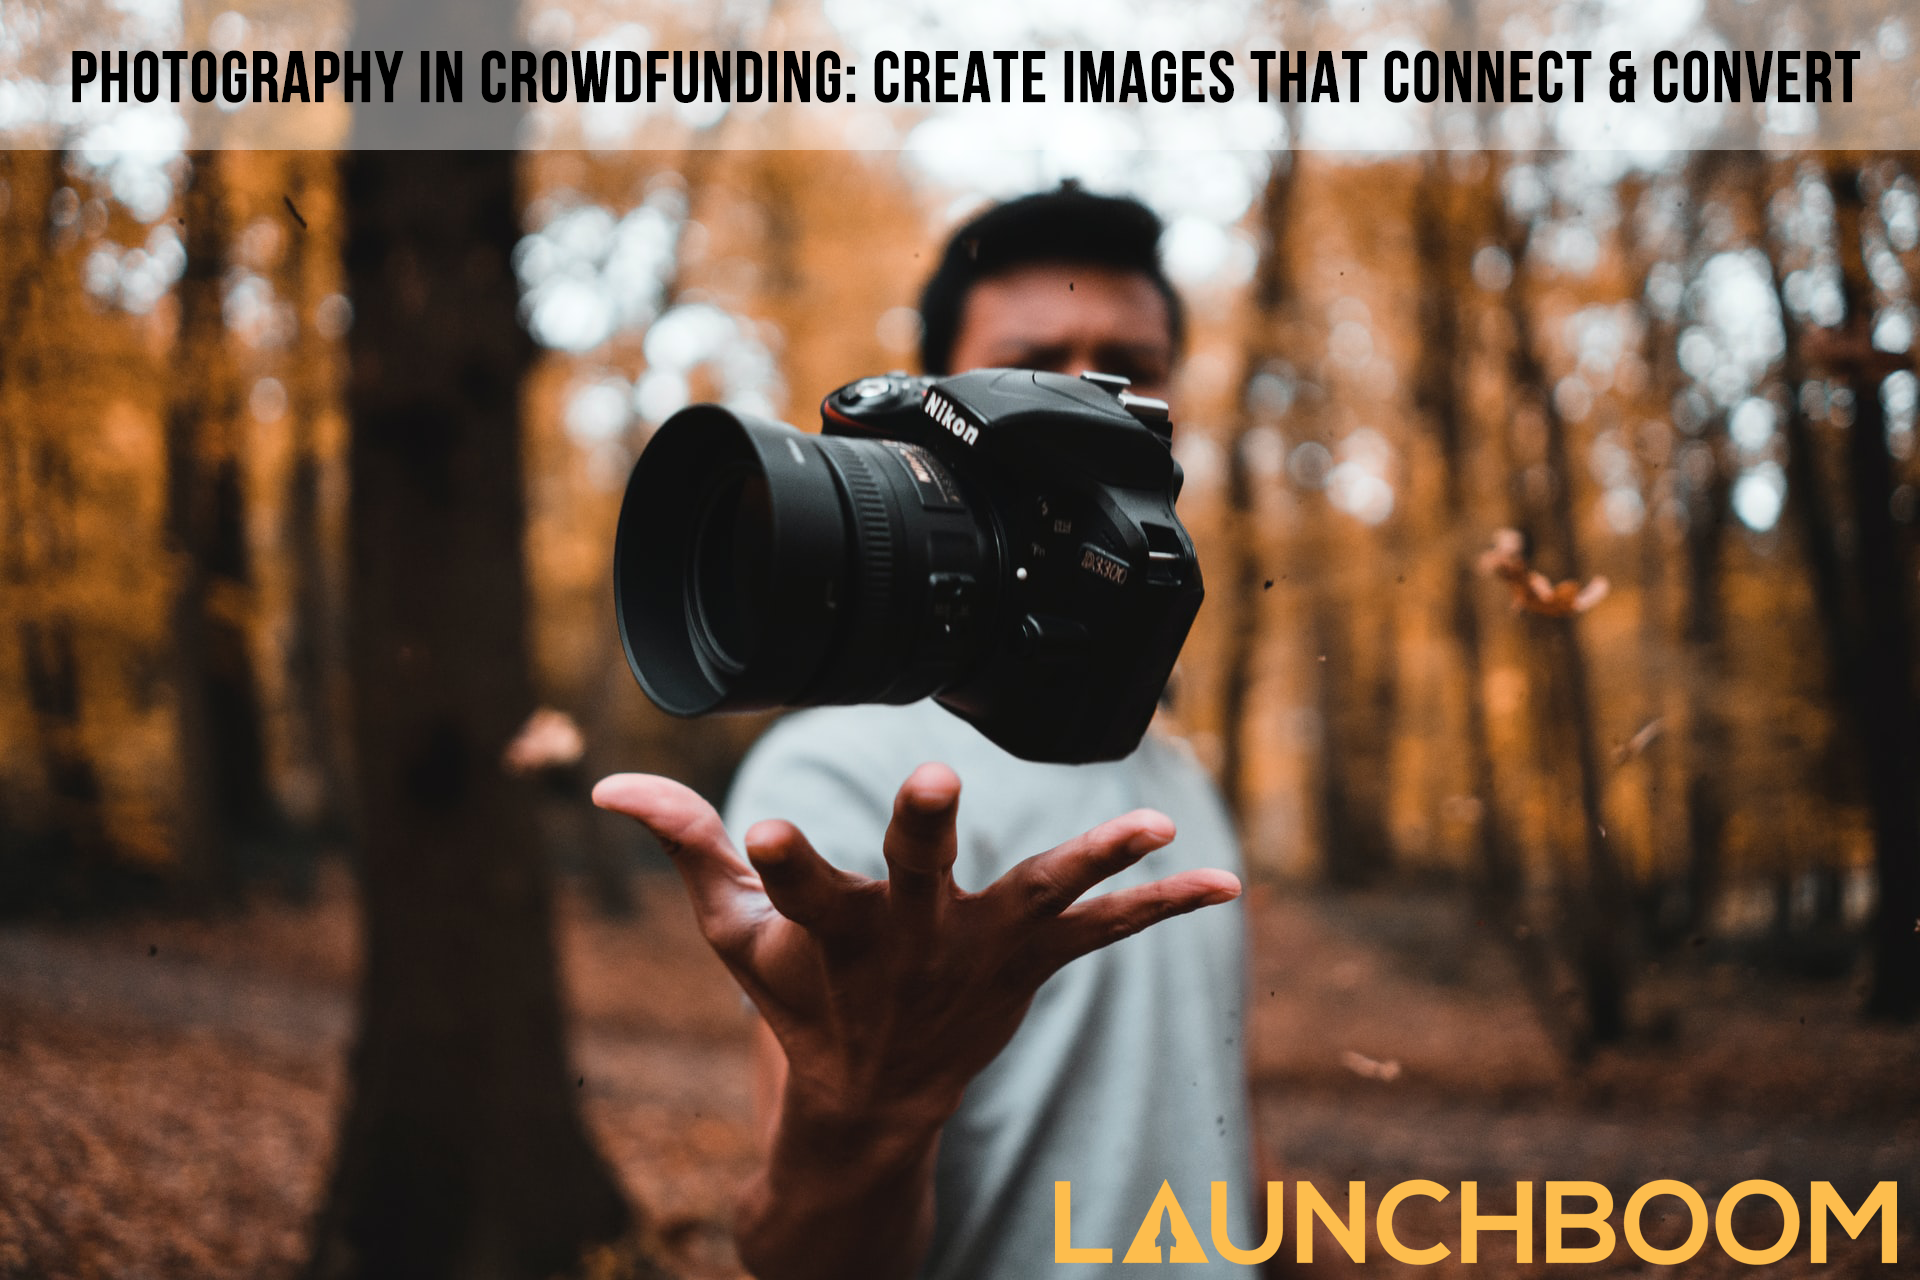 Photography in crowdfunding: Create images that connect and convert